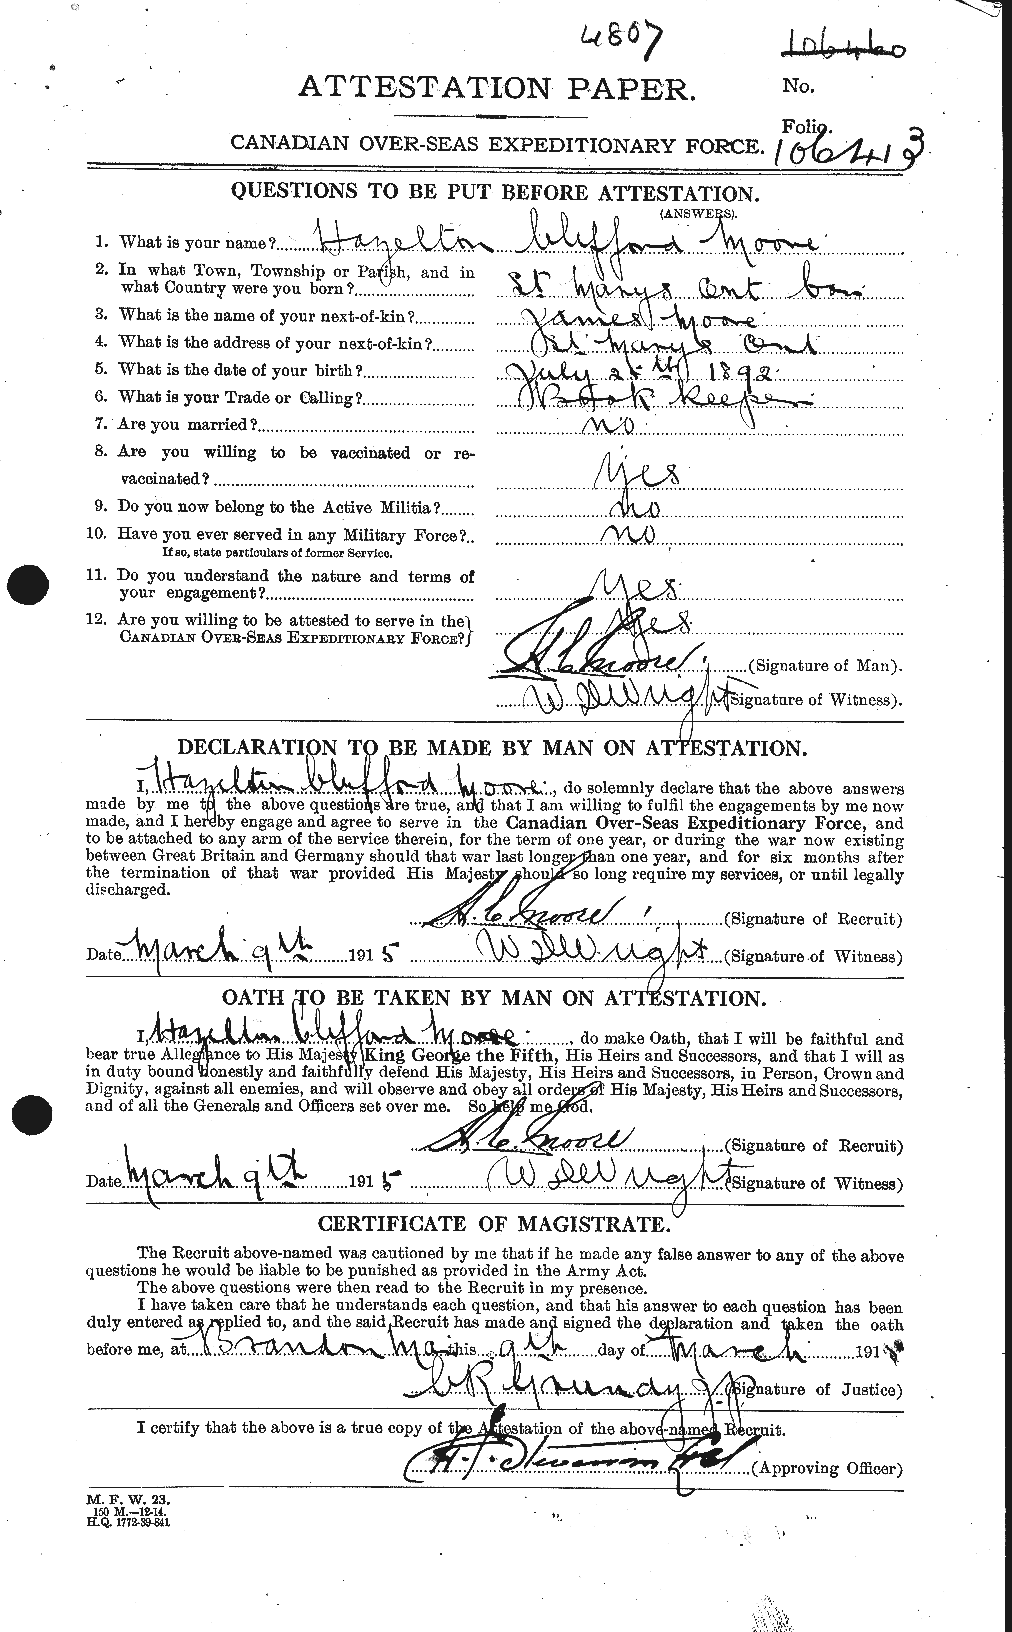 Personnel Records of the First World War - CEF 502092a